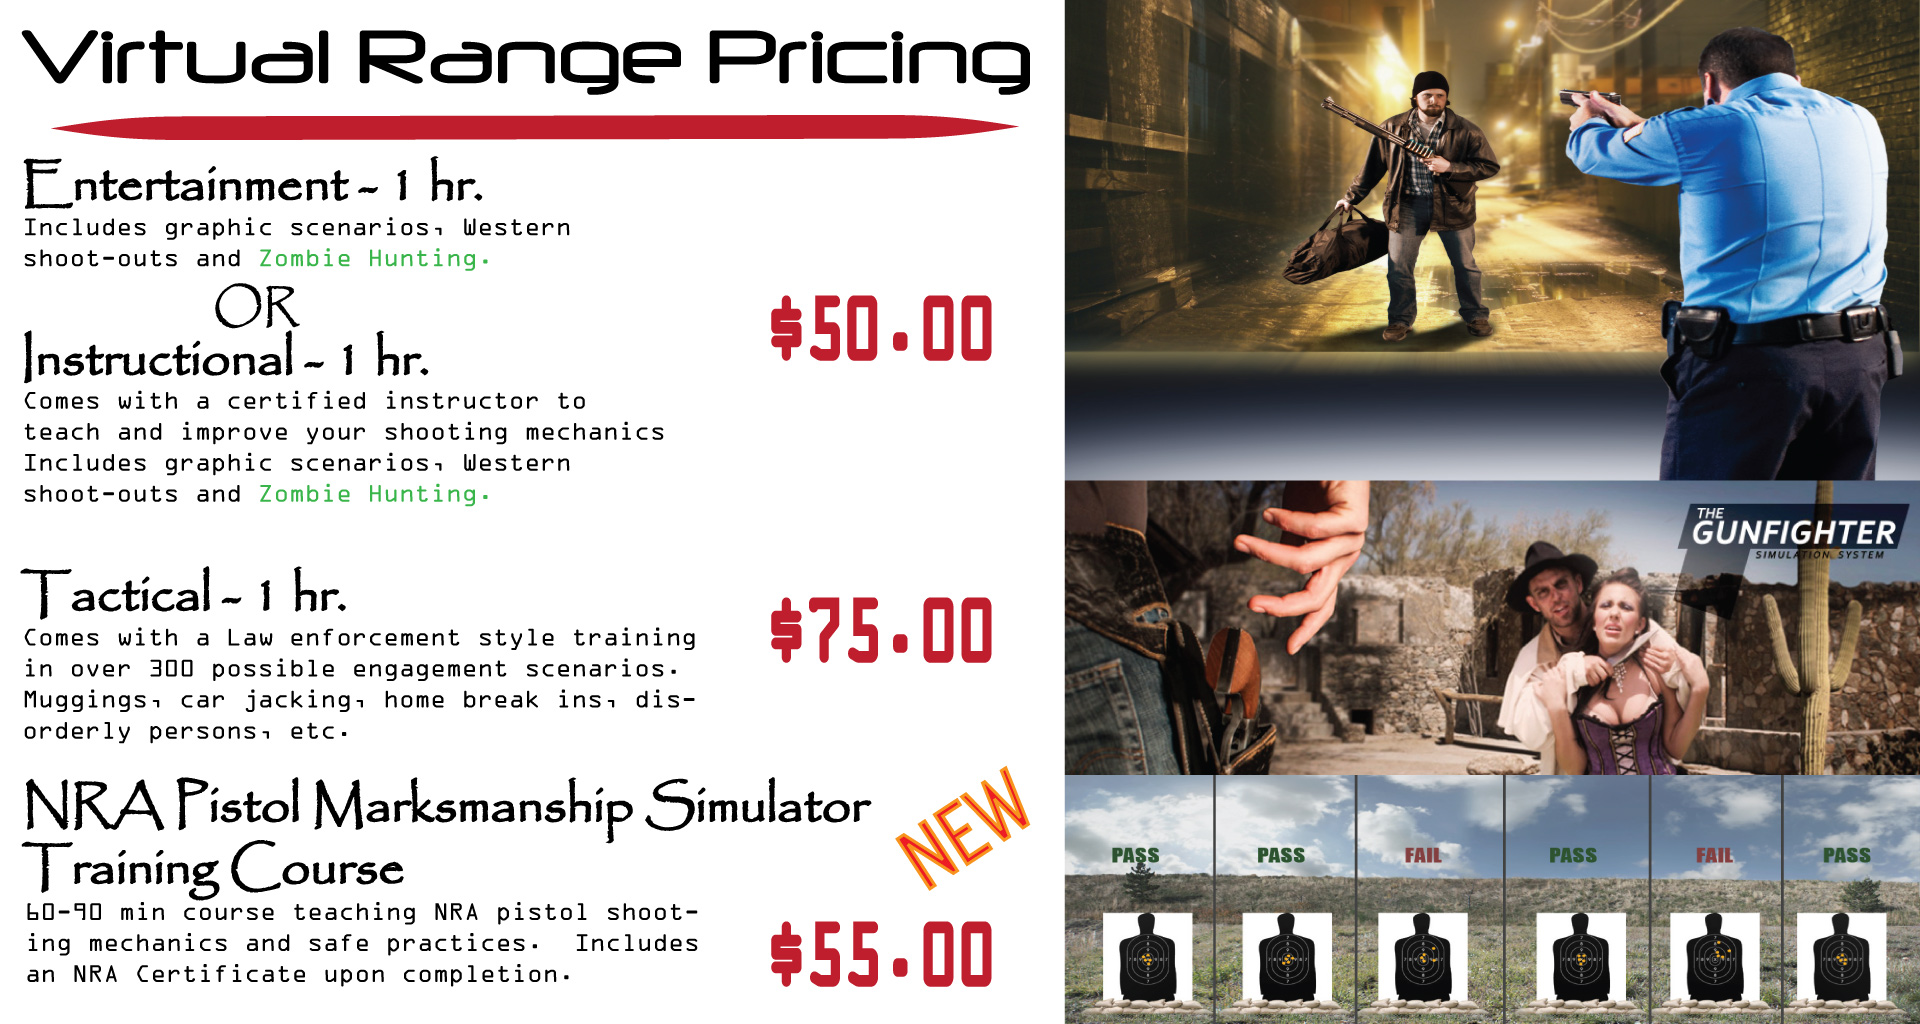 Pricing for our virtual training simulator